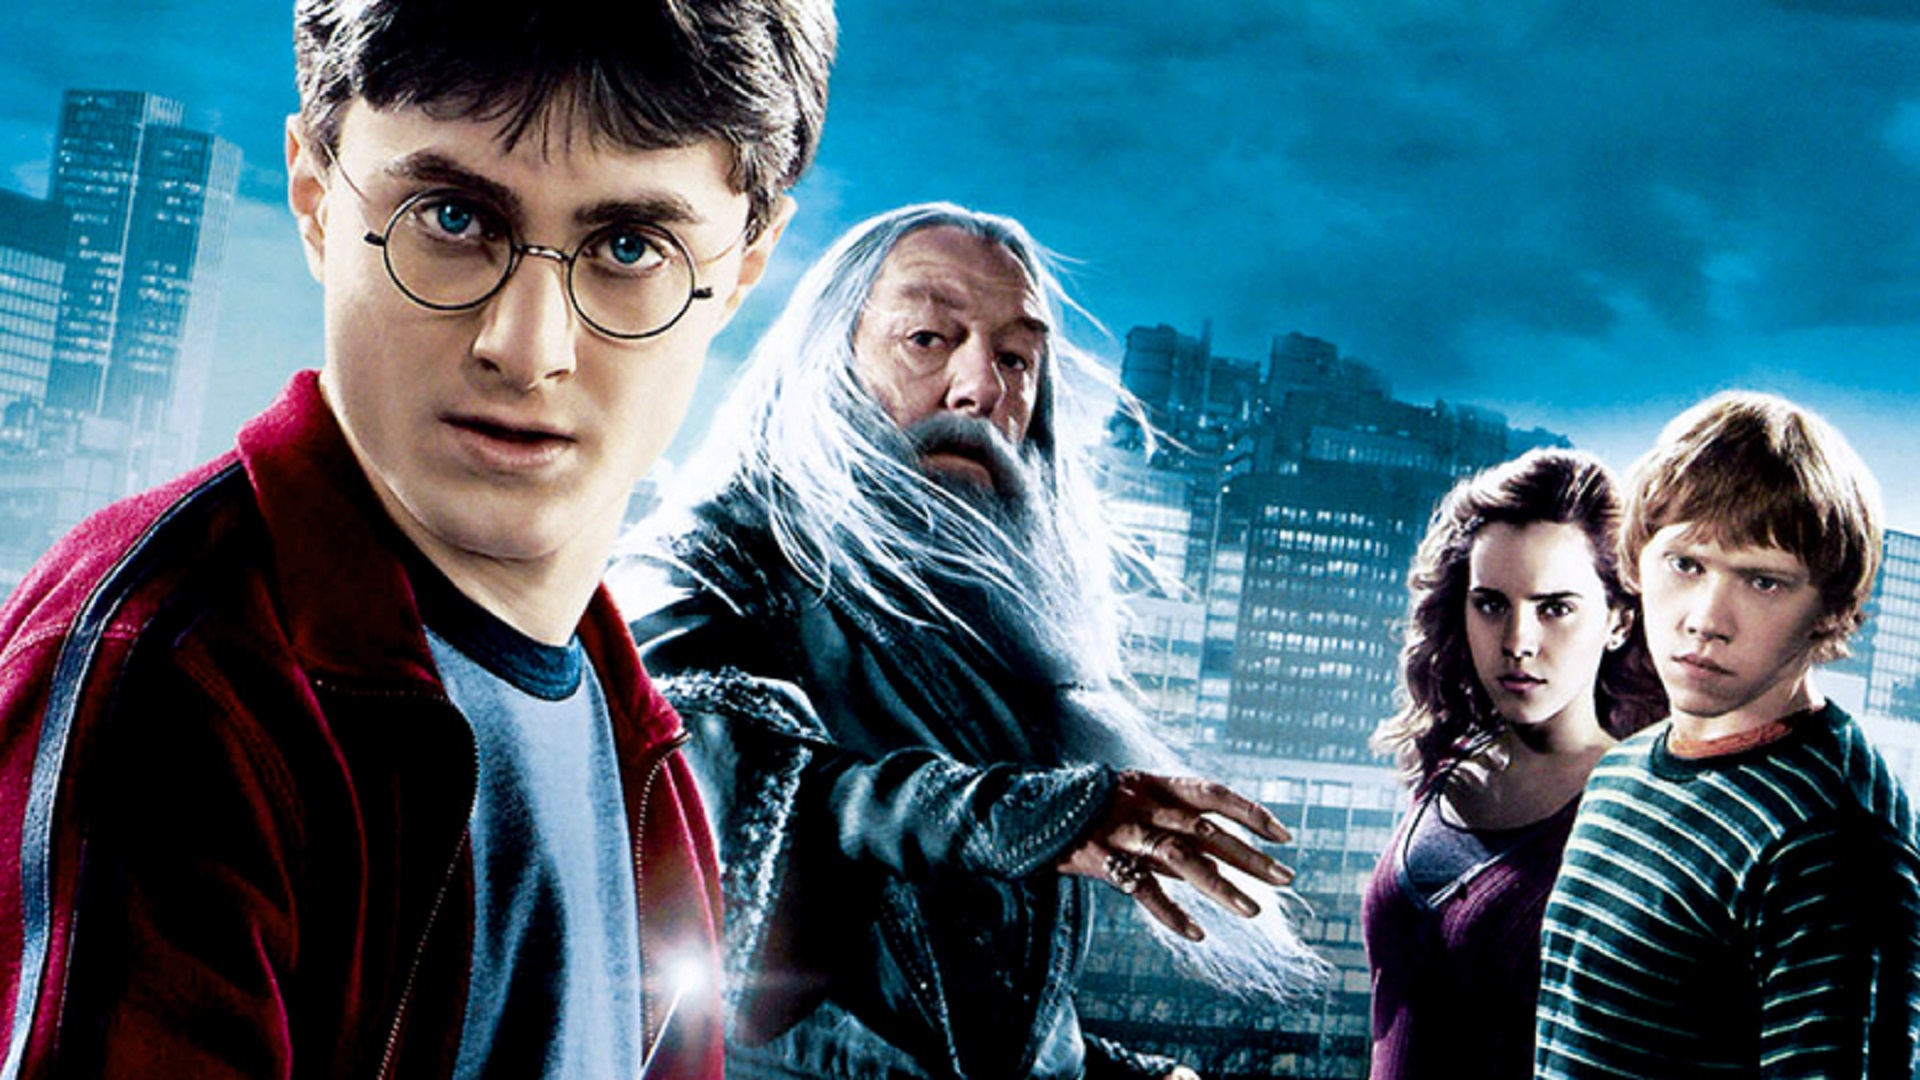 harry potter 2 movies free download